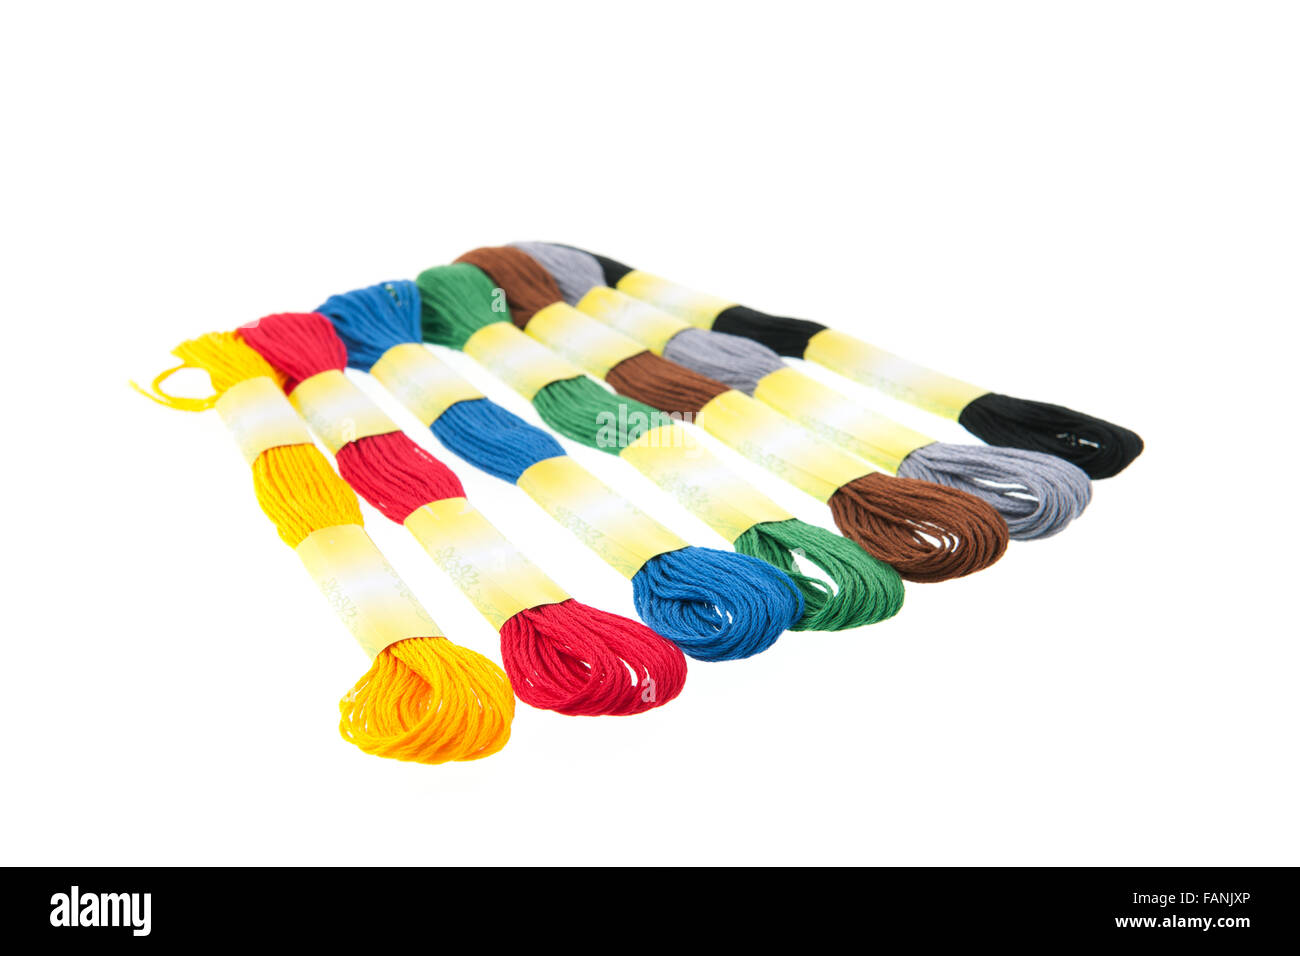 Colorful thread for embroider Stock Photo